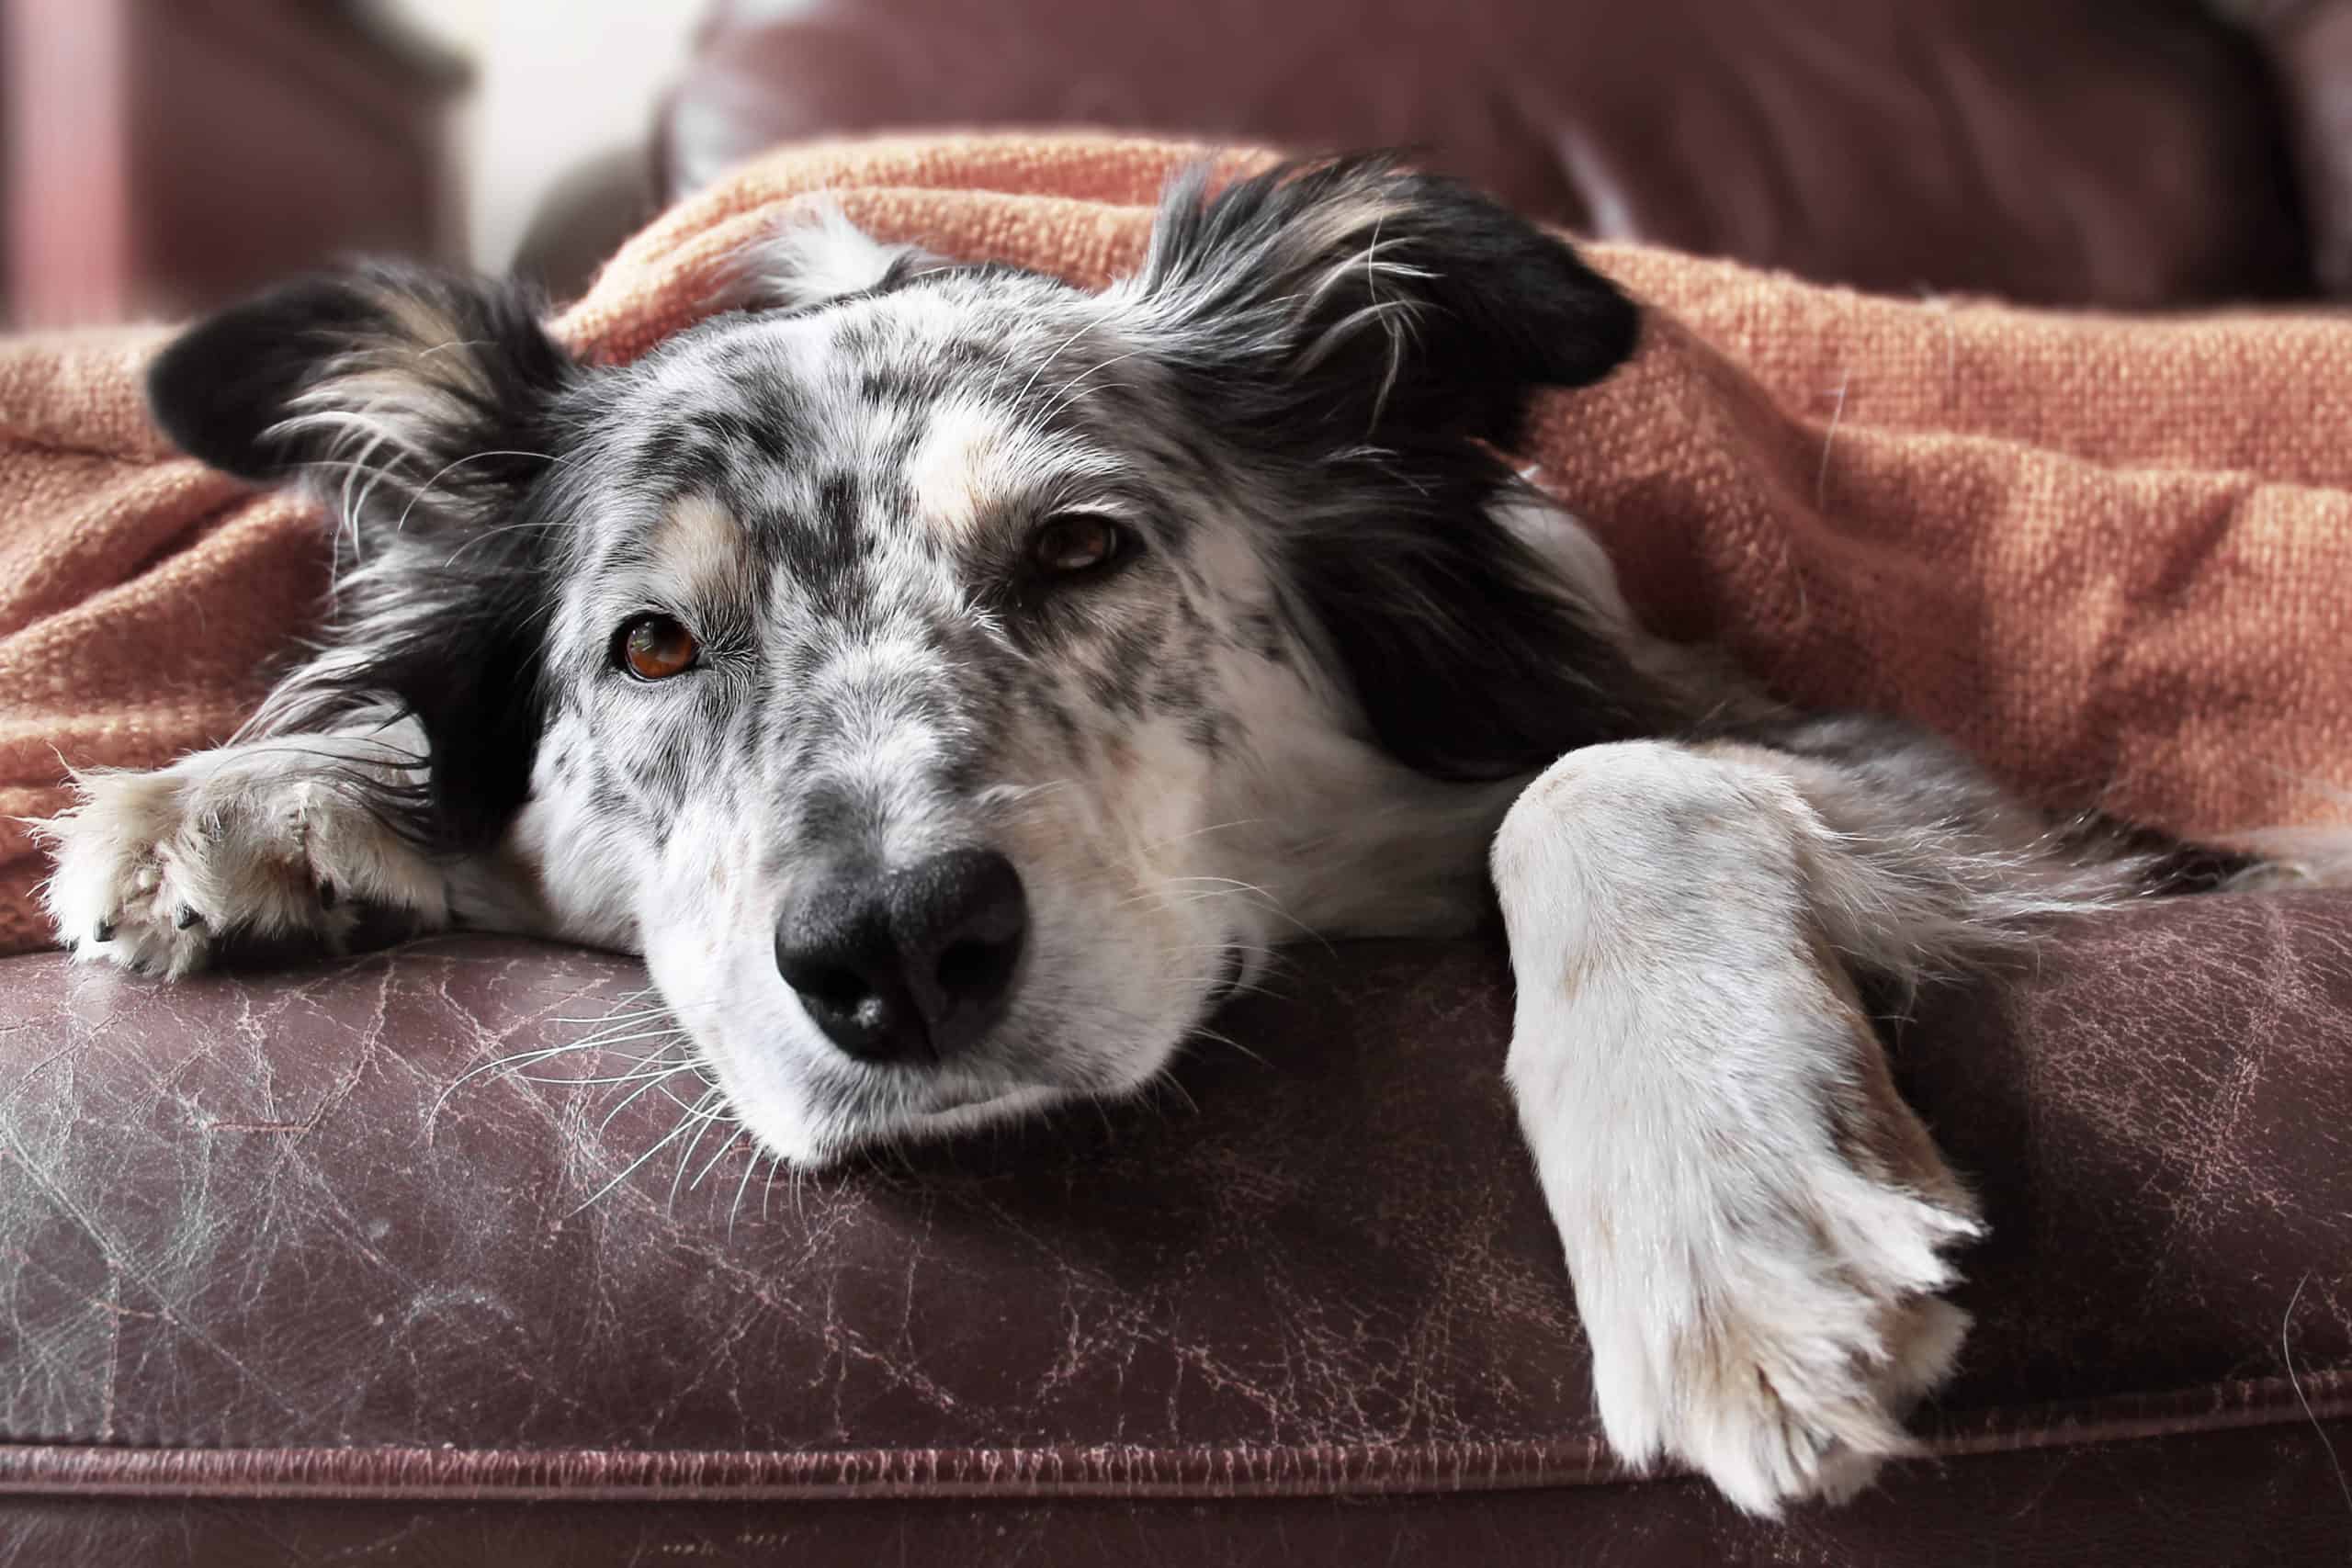 Do dogs get depressed when in heat?